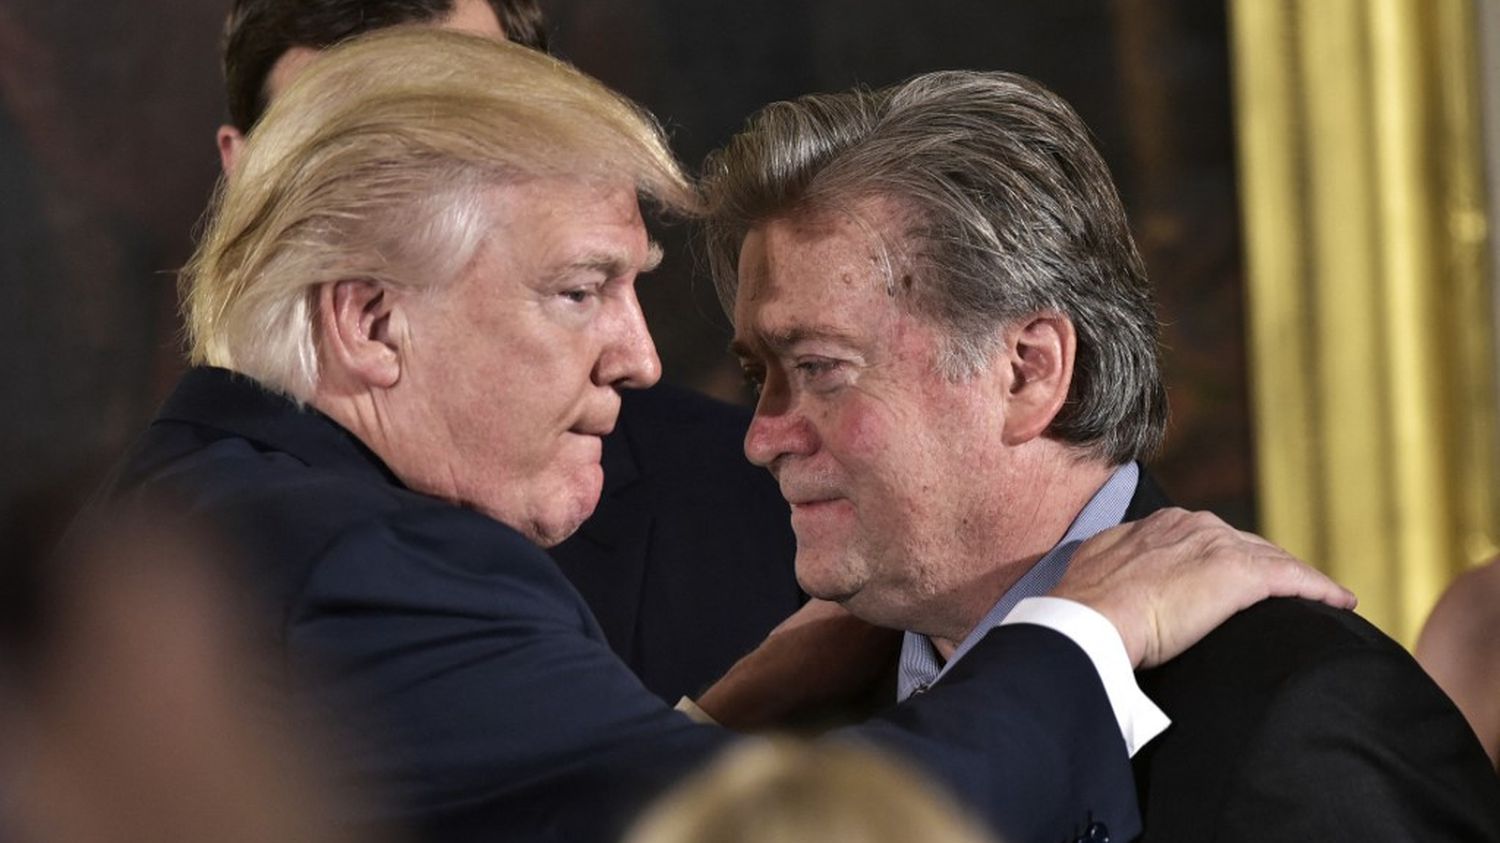 Steve Bannon, a close associate of Donald Trump, has been accused of refusing to testify.

